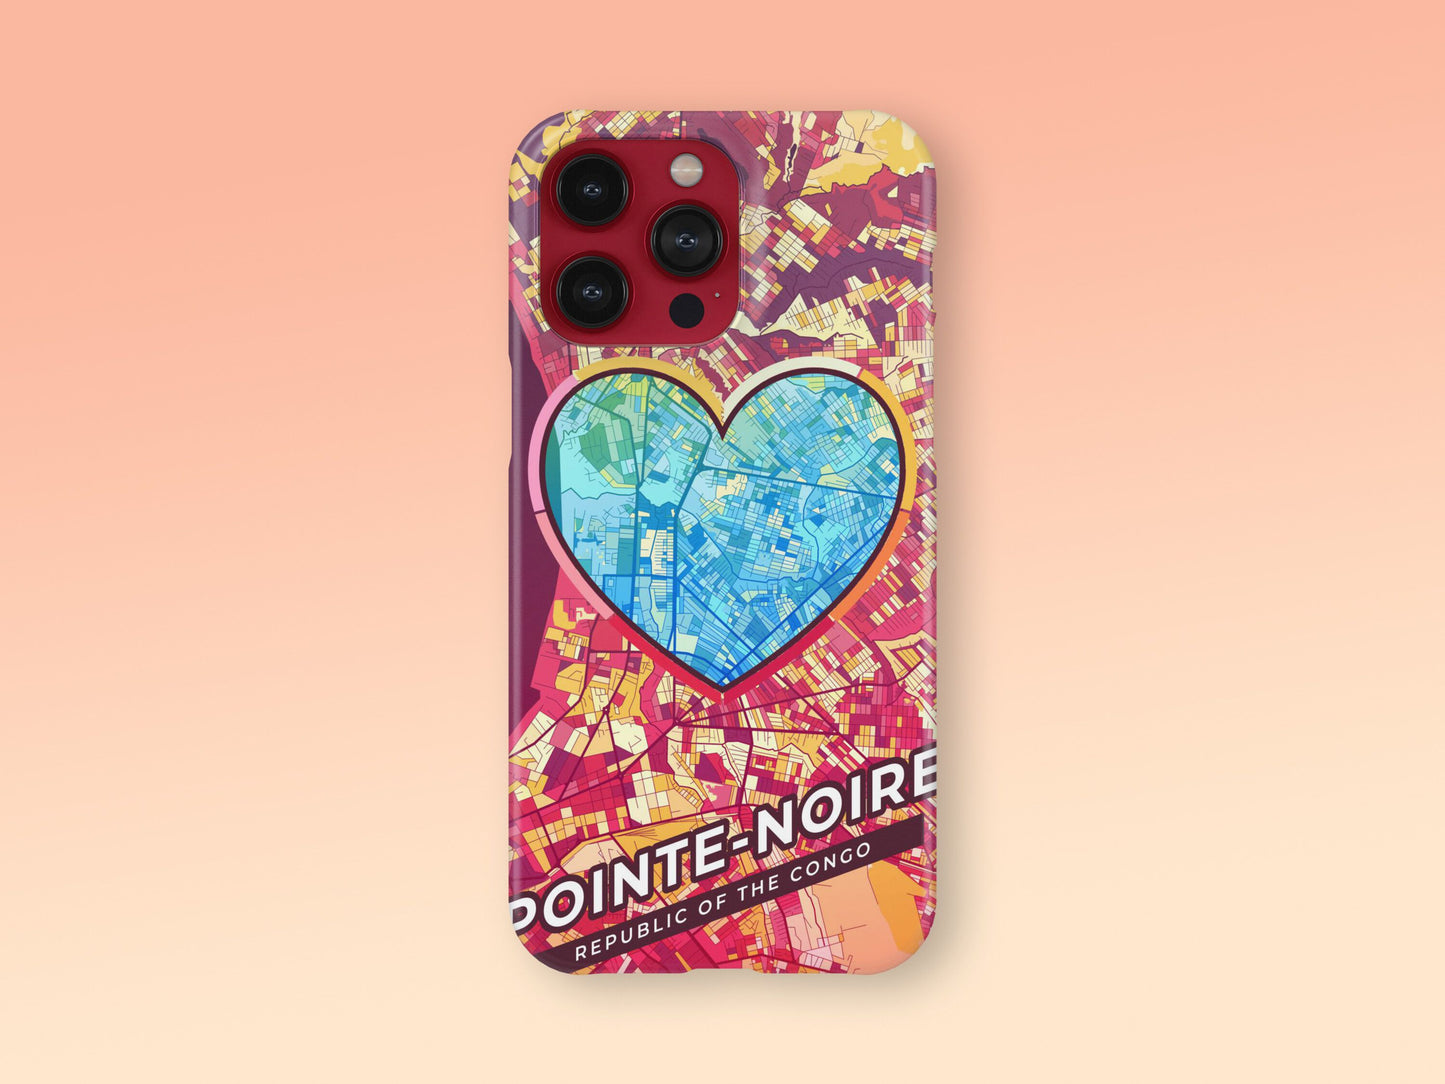 Pointe-Noire Republic Of The Congo slim phone case with colorful icon 2